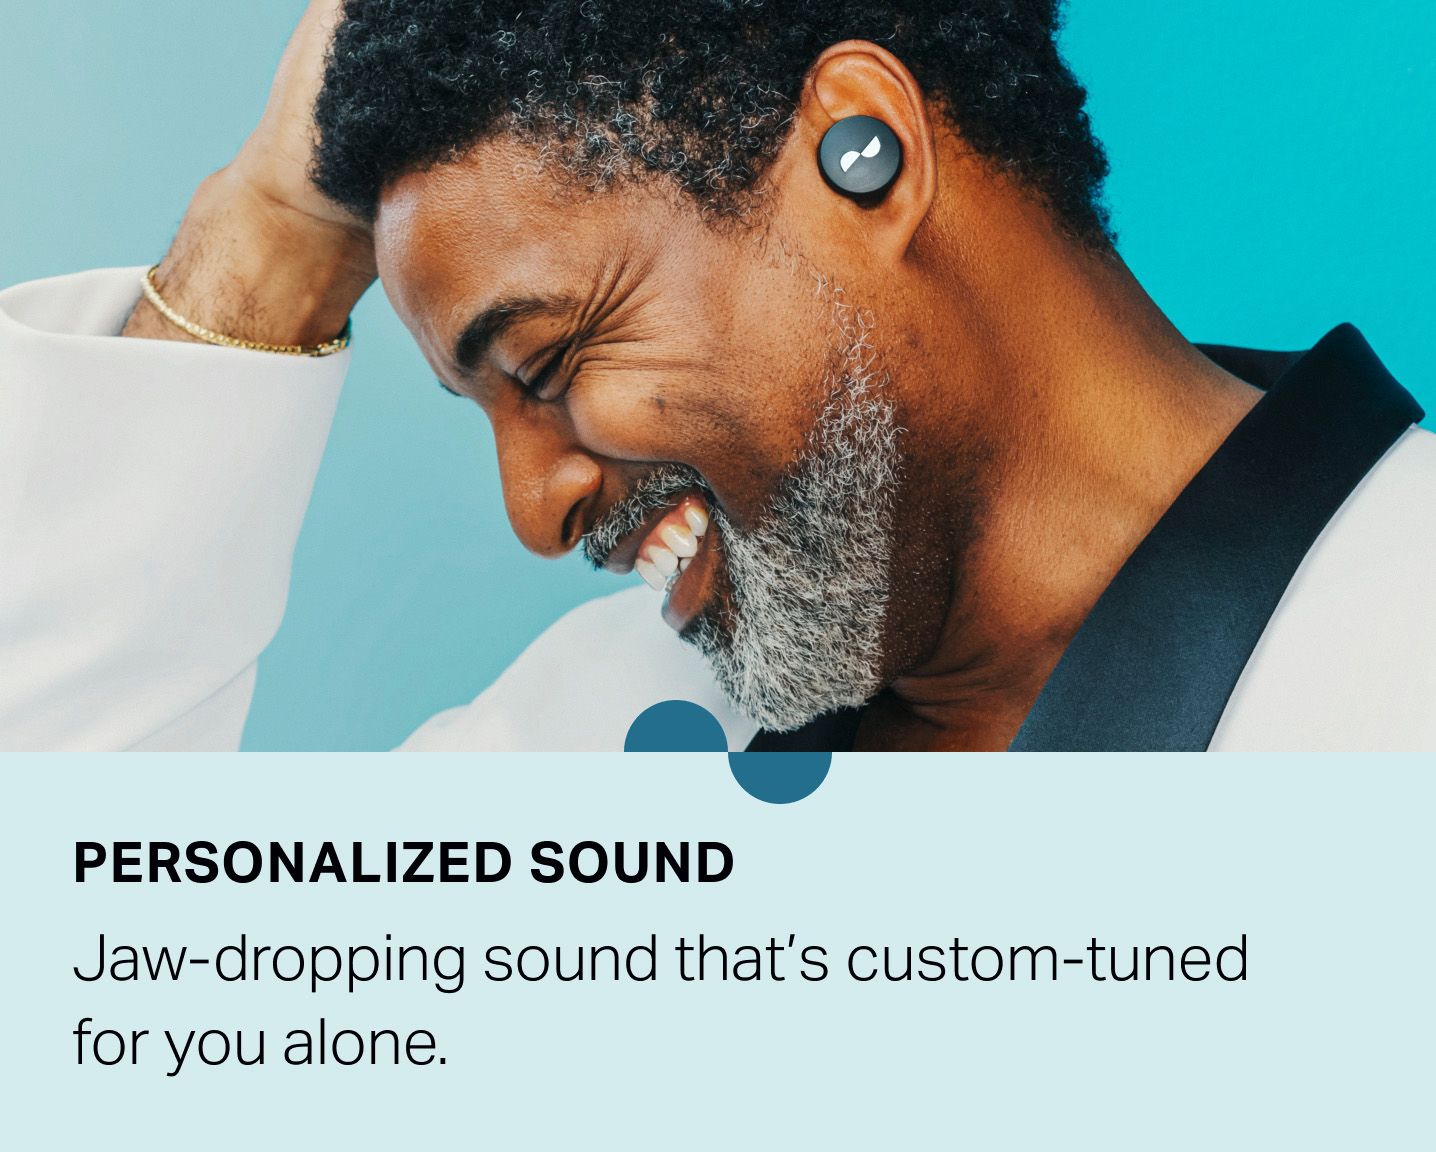 Person with NURATRUE earbuds in ears — "Personalized sound: Jaw-dropping sound that's custom-tuned for you alone."